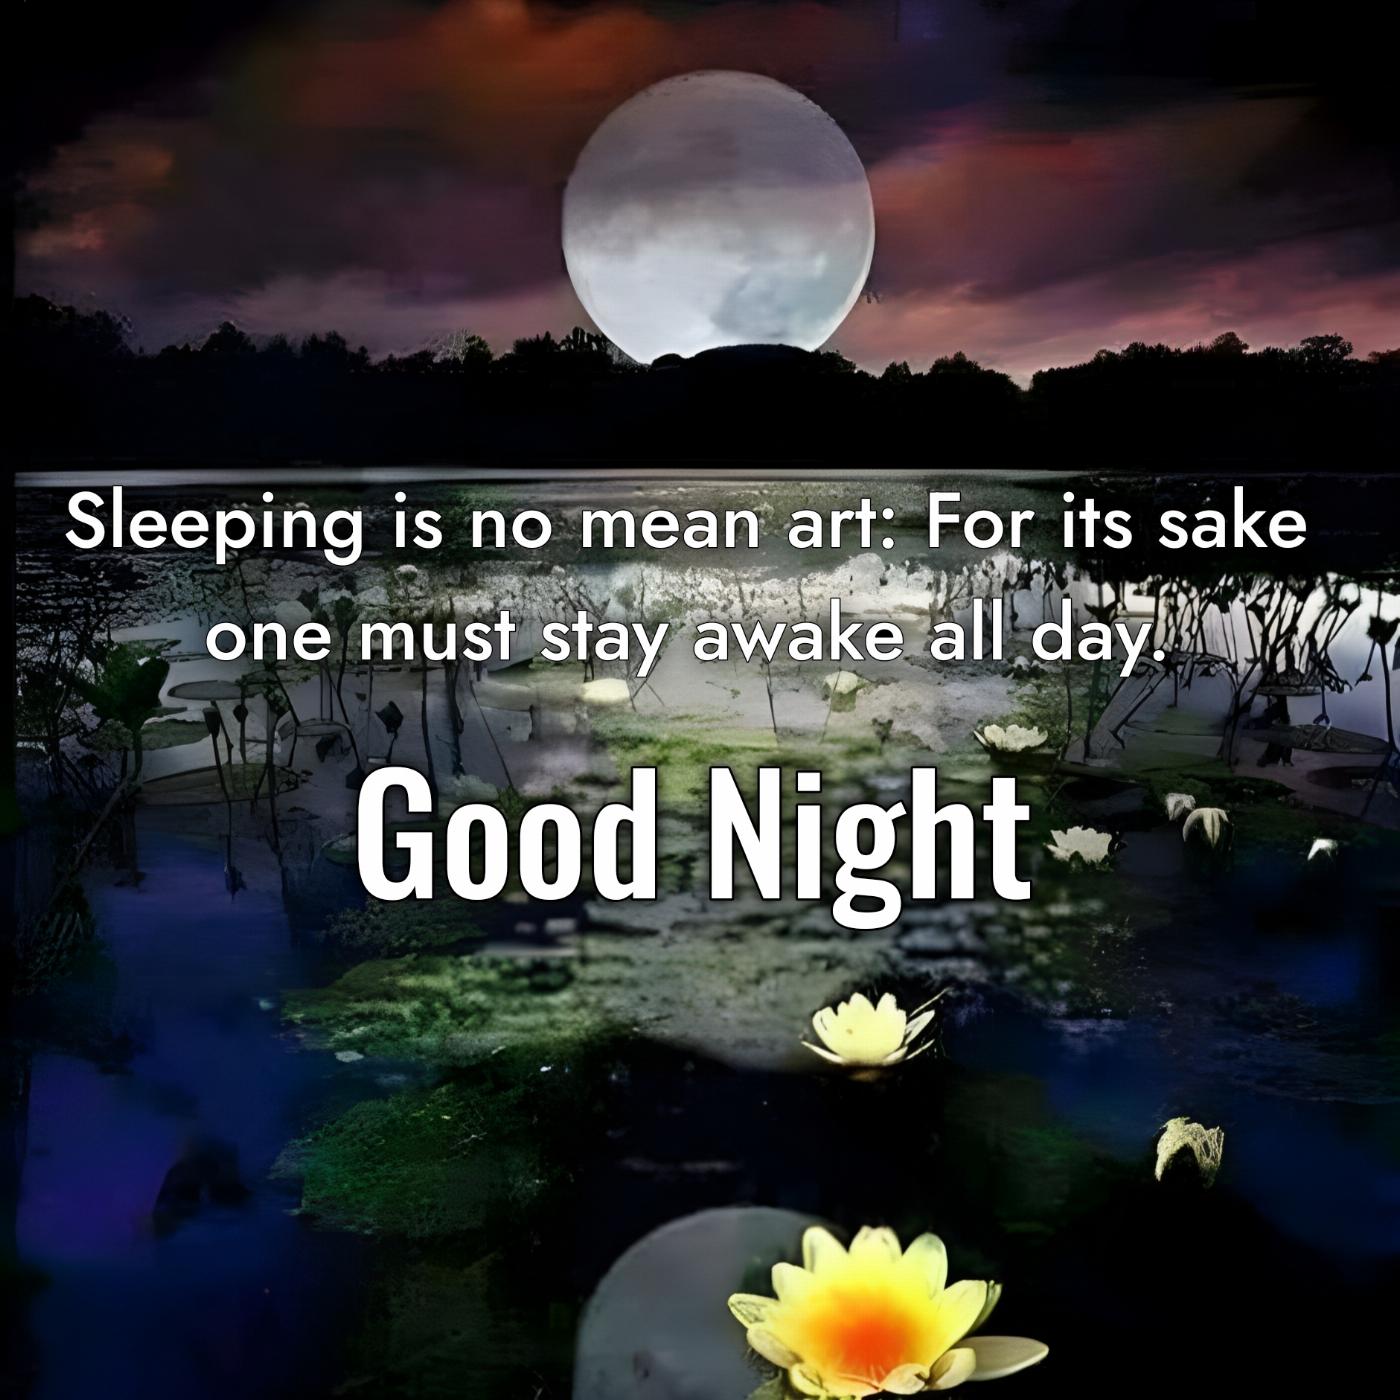 Sleeping is no mean art for its sake one must stay awake